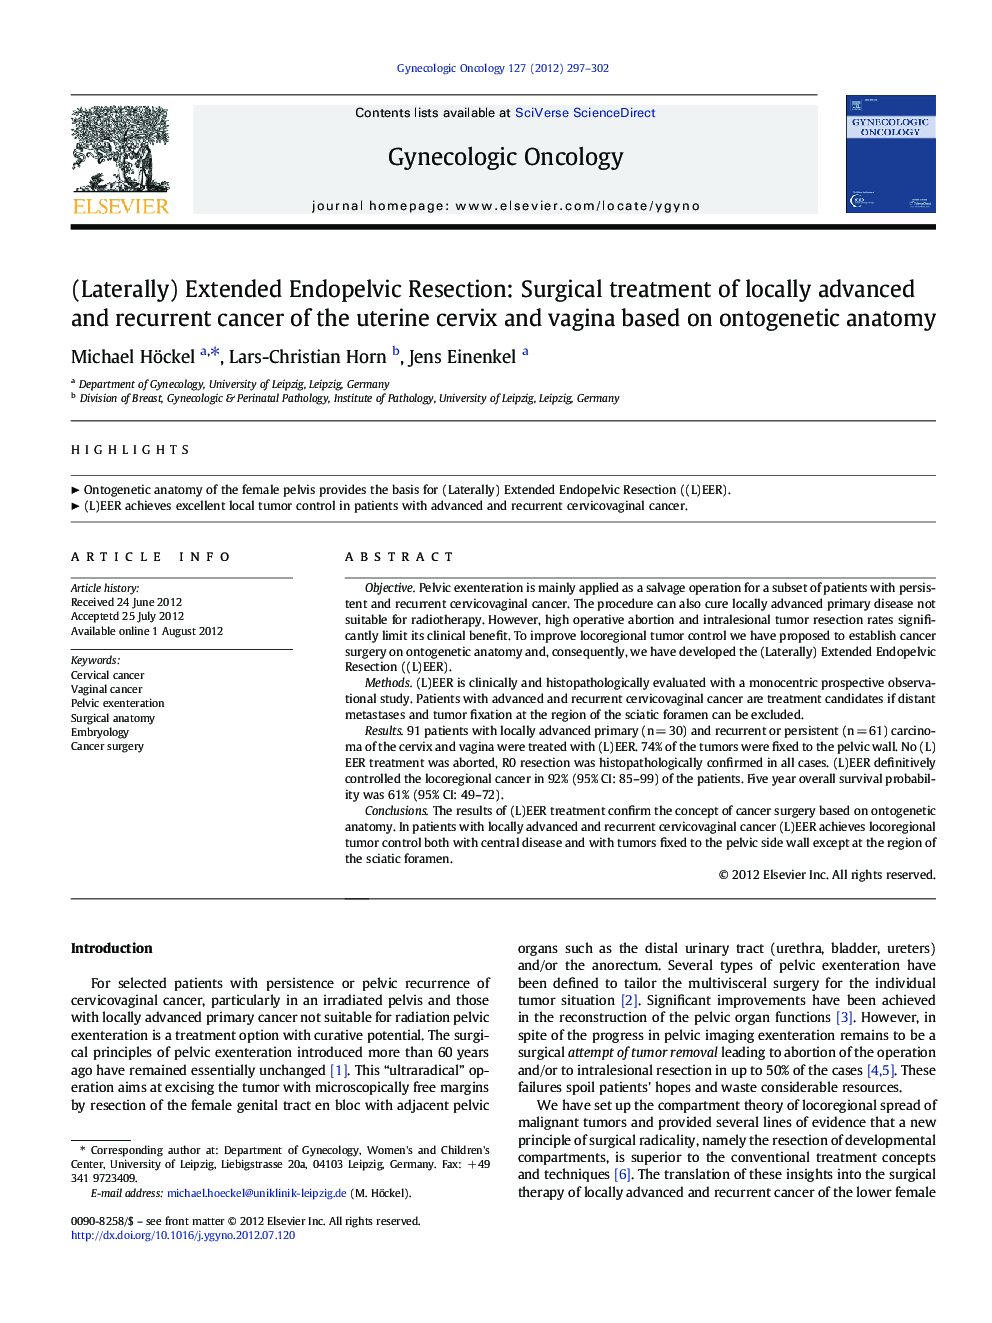 (Laterally) Extended Endopelvic Resection: Surgical treatment of locally advanced and recurrent cancer of the uterine cervix and vagina based on ontogenetic anatomy